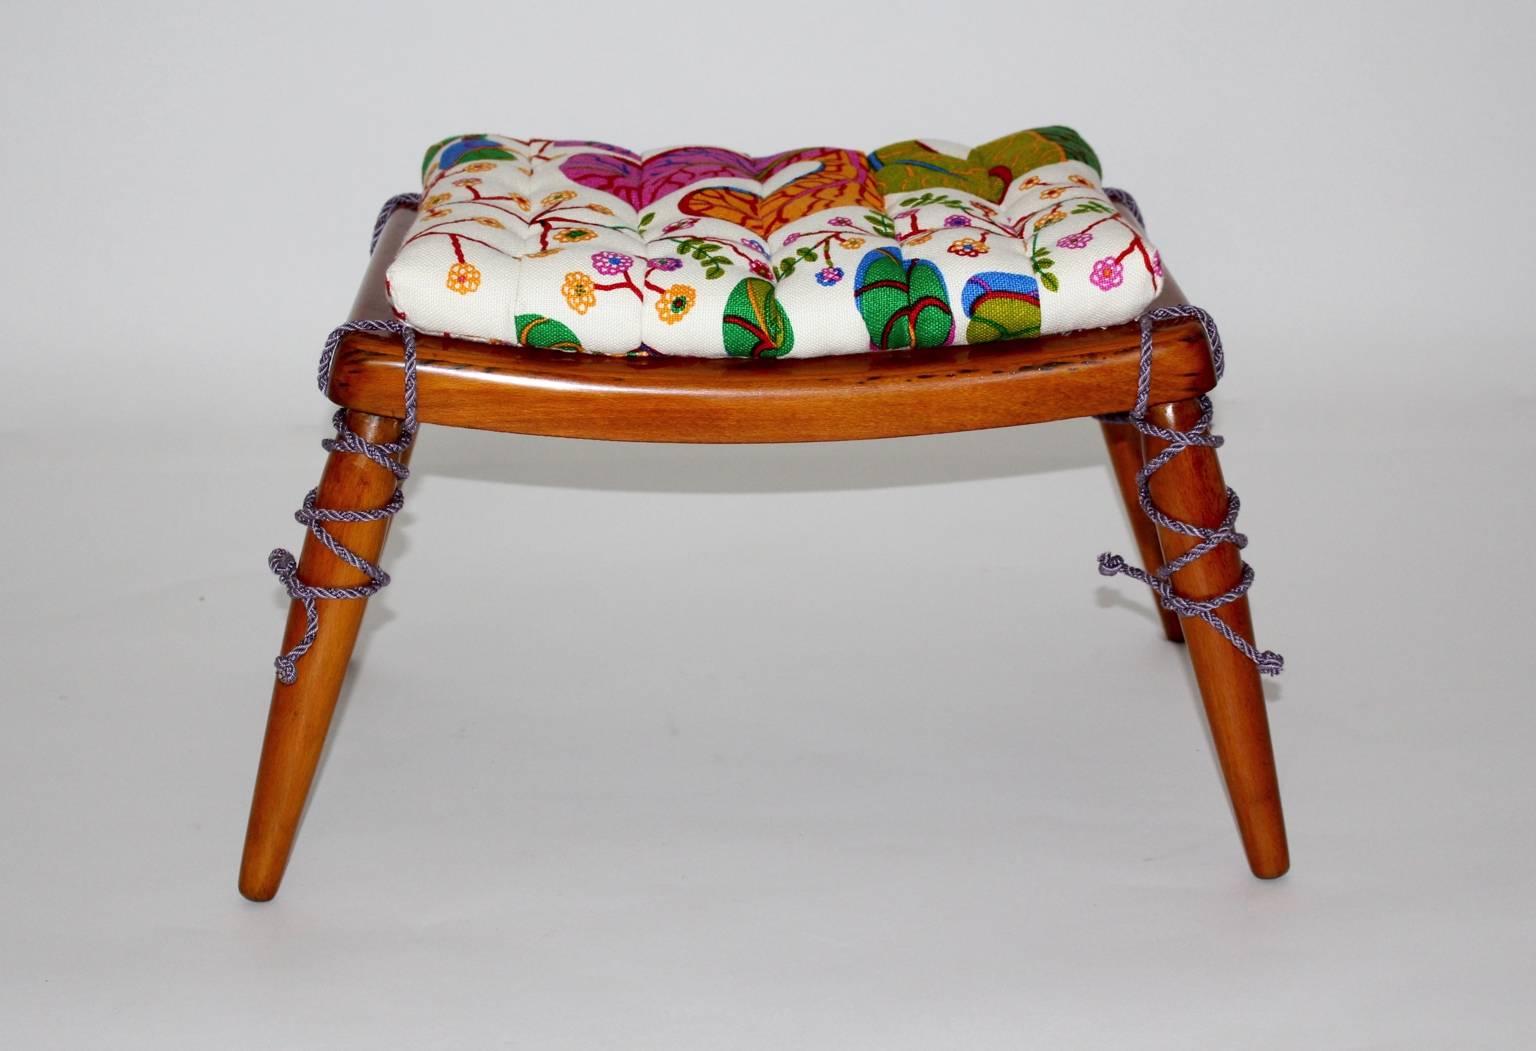 Mid Century Modern vintage stool or ottoman by Anna Lülja Praun circa 1952 from cherry wood. and one loose cushion.
The cushion is newly covered with amazing textile fabric by Josef Frank, now manufactured by Svenskt Tenn and lavender colored cords